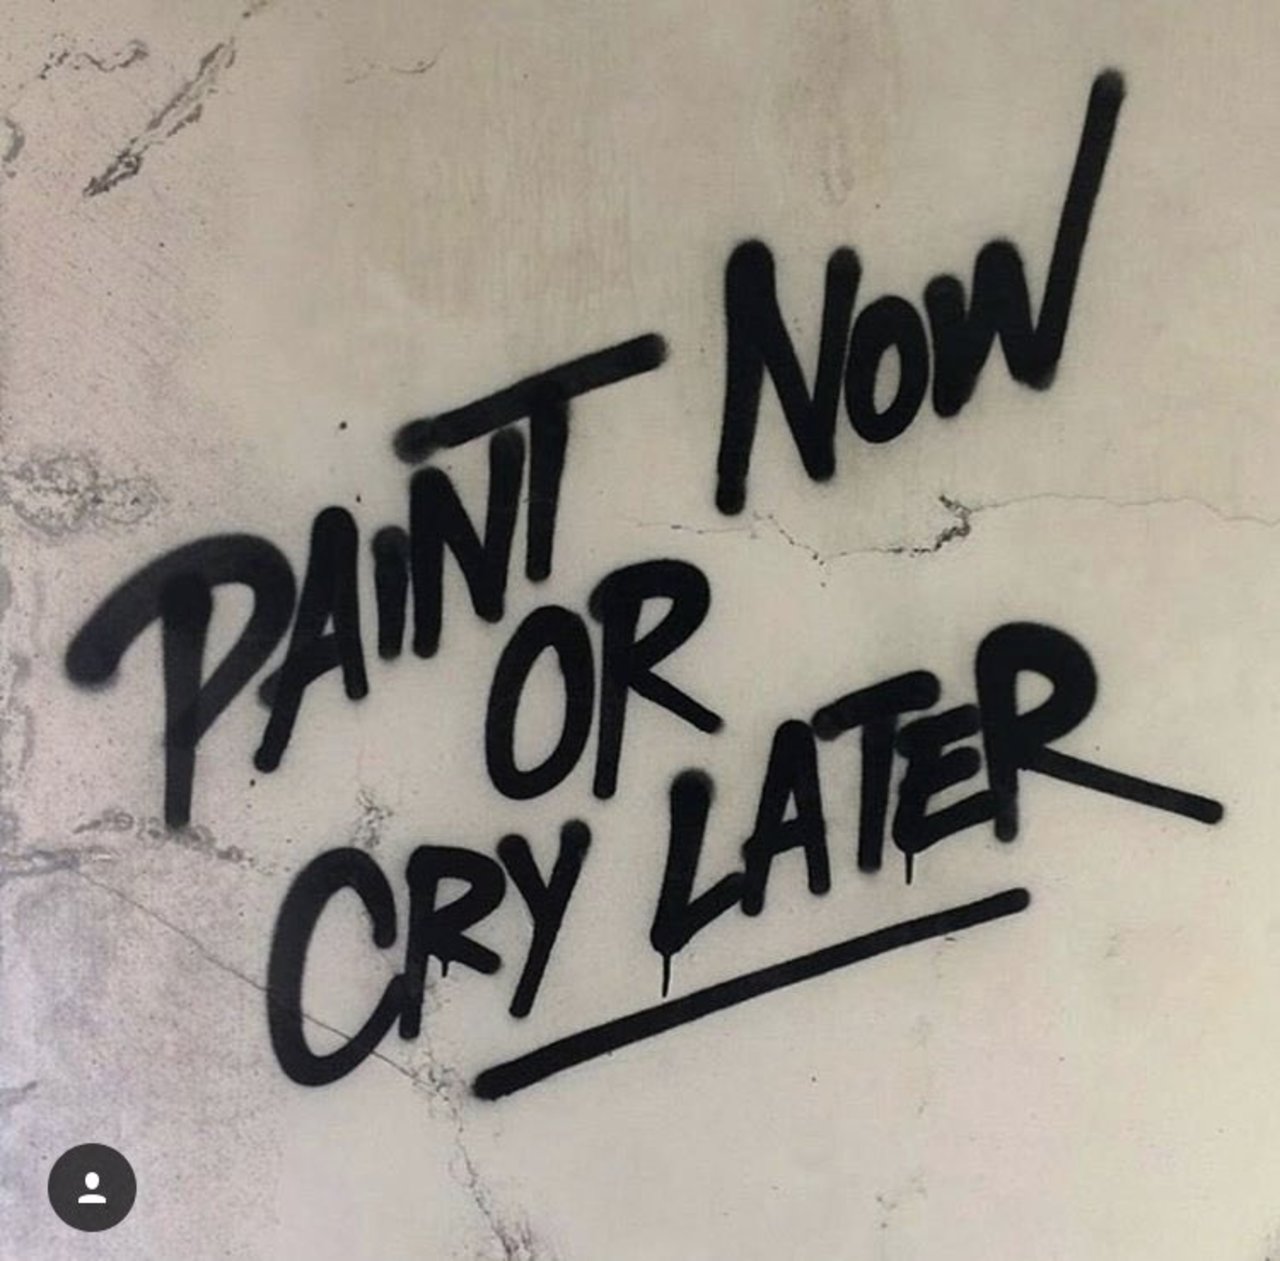 « Paint now or cry later. » #streetart #graffiti https://t.co/81qvNHV1JF